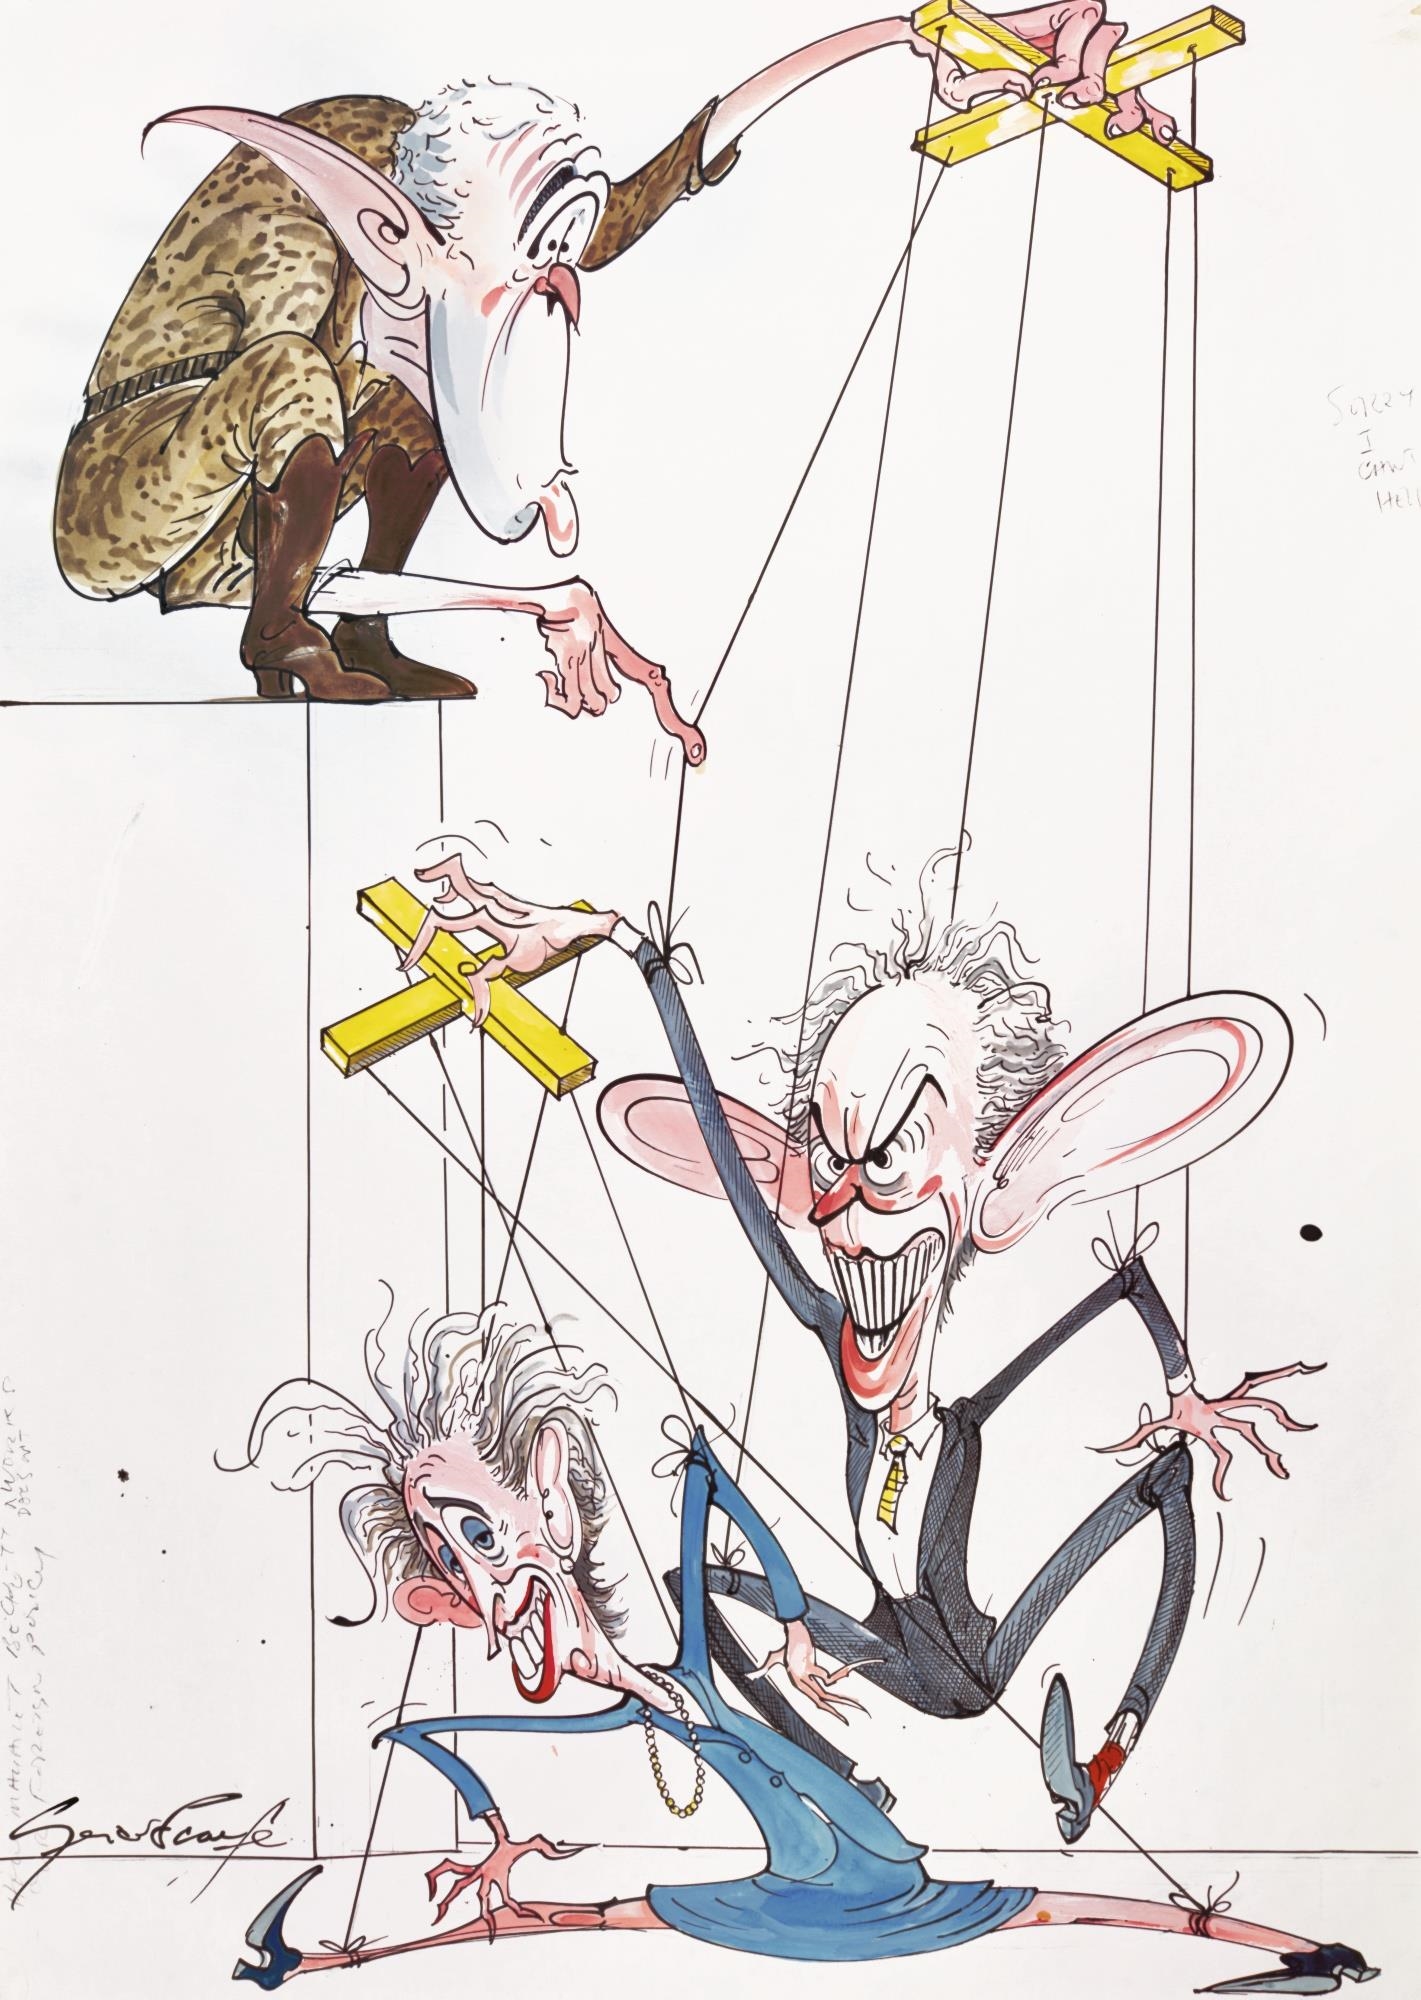 How Margaret Beckett Doesn't Work by Gerald Scarfe